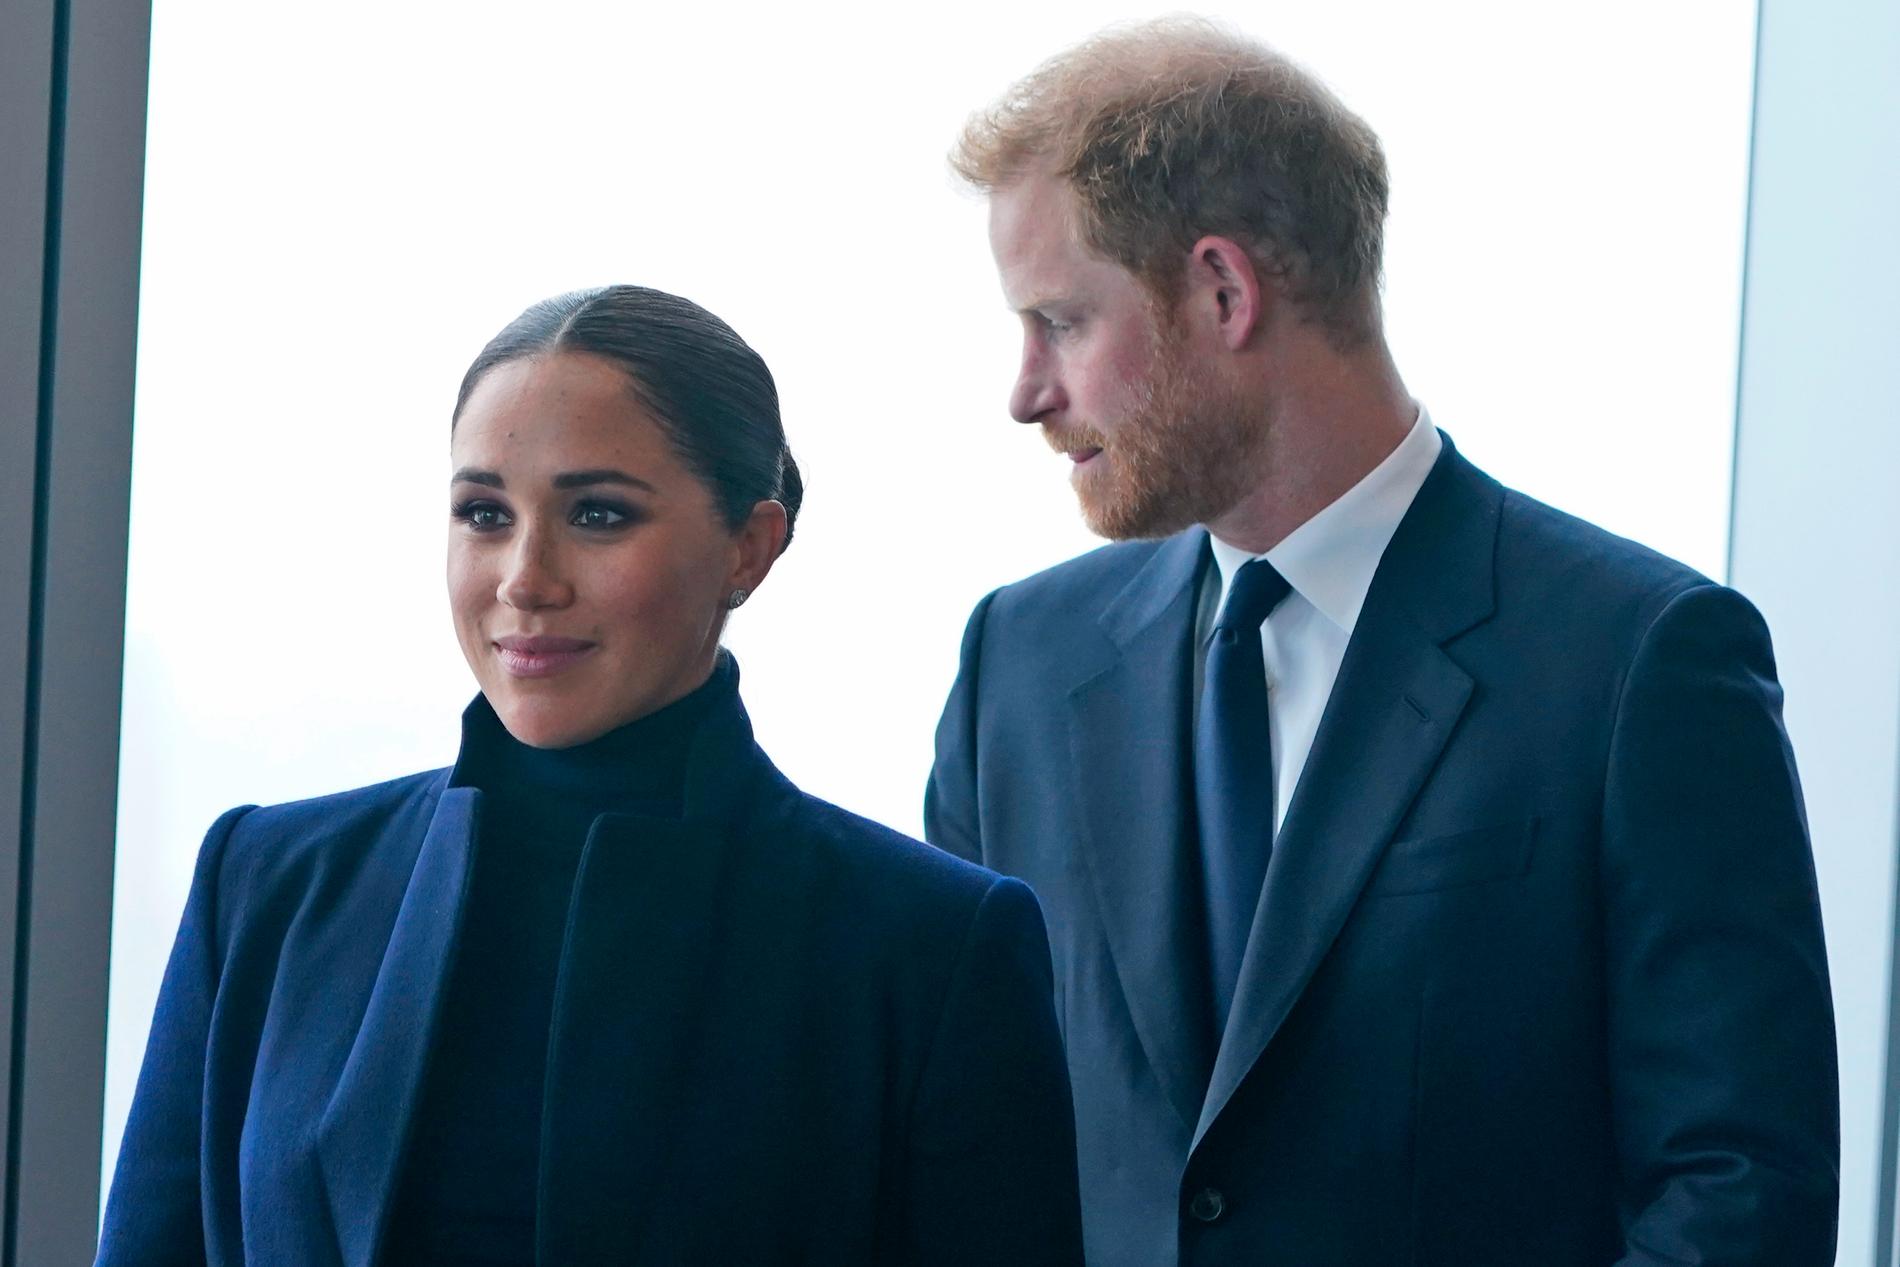 The paparazzi chased Prince Harry and Duchess Meghan for two hours